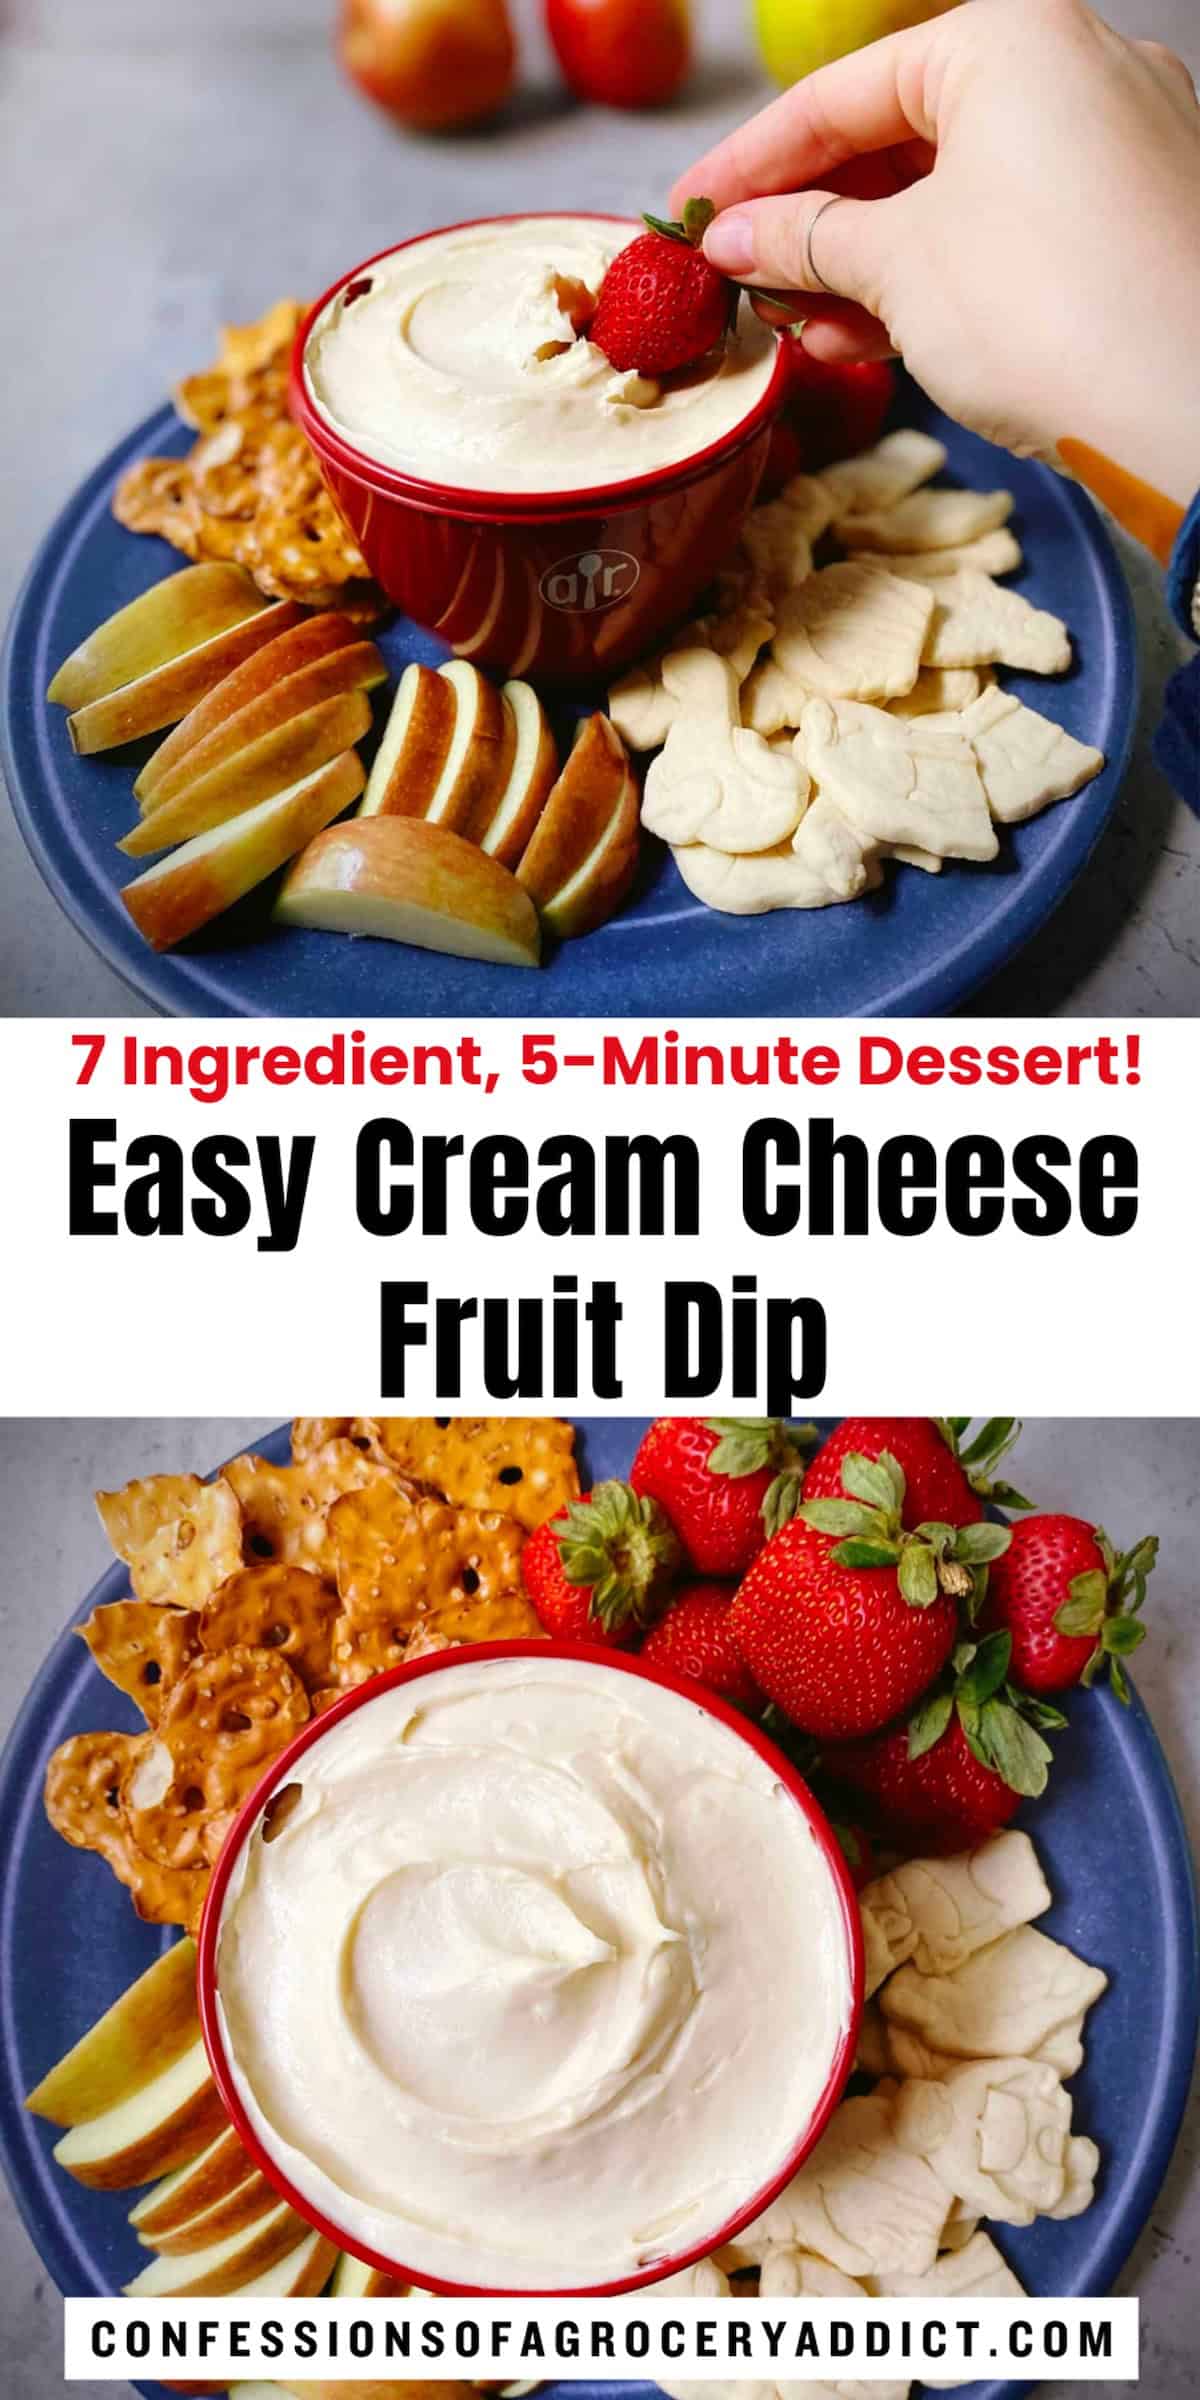 vertical pin with two photos (one with a hand dipping a strawberry into cream cheese fruit dip, the second a flat lay shot of a red bowl filled with cream cheese fruit dip on a blue plate with fresh strawberries, apple slices, animal crackers, and pretzel thins) with text overlay that reads 7-ingredient 5-minute dessert exclamation point easy cream cheese fruit dip."